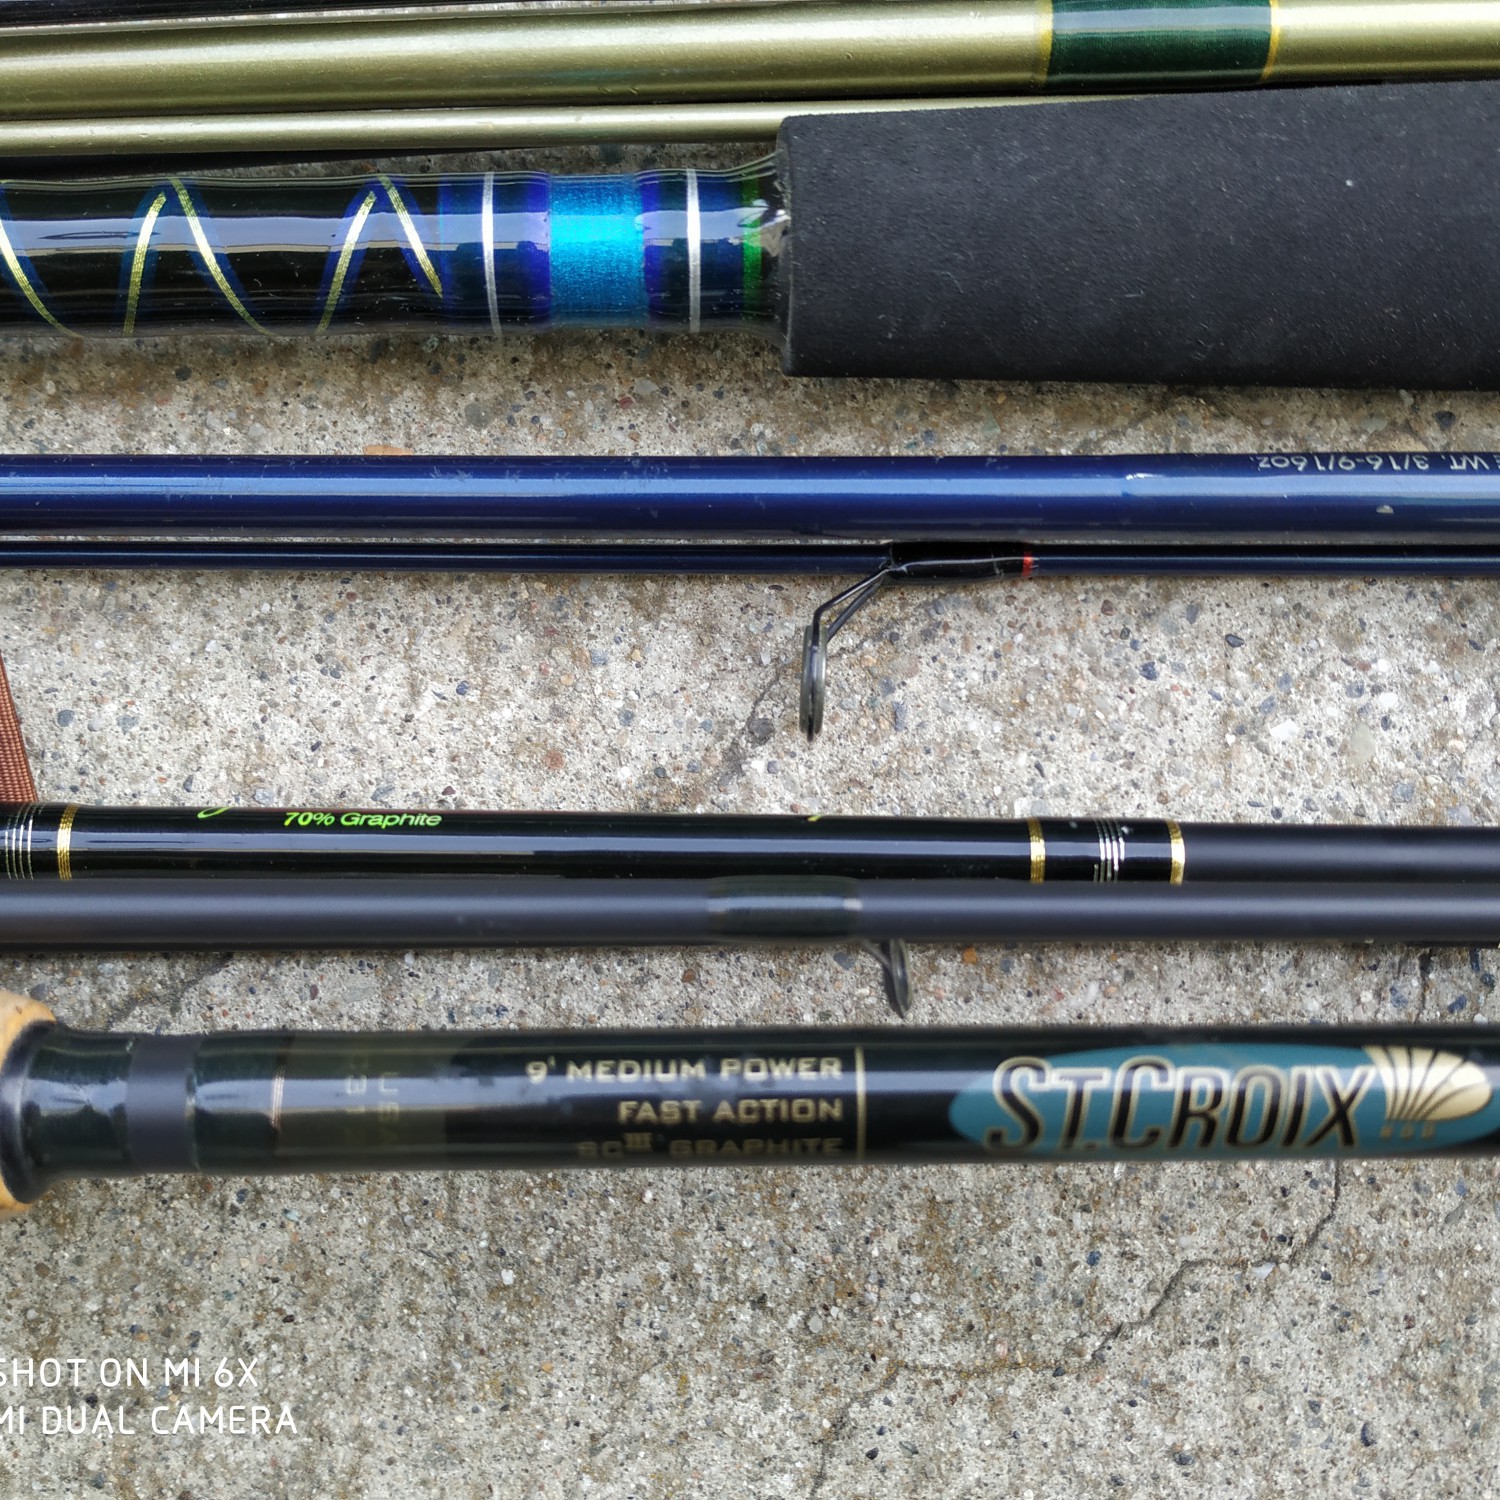 St. Croix Fishing Rods MIX of Rods with Covers Used 